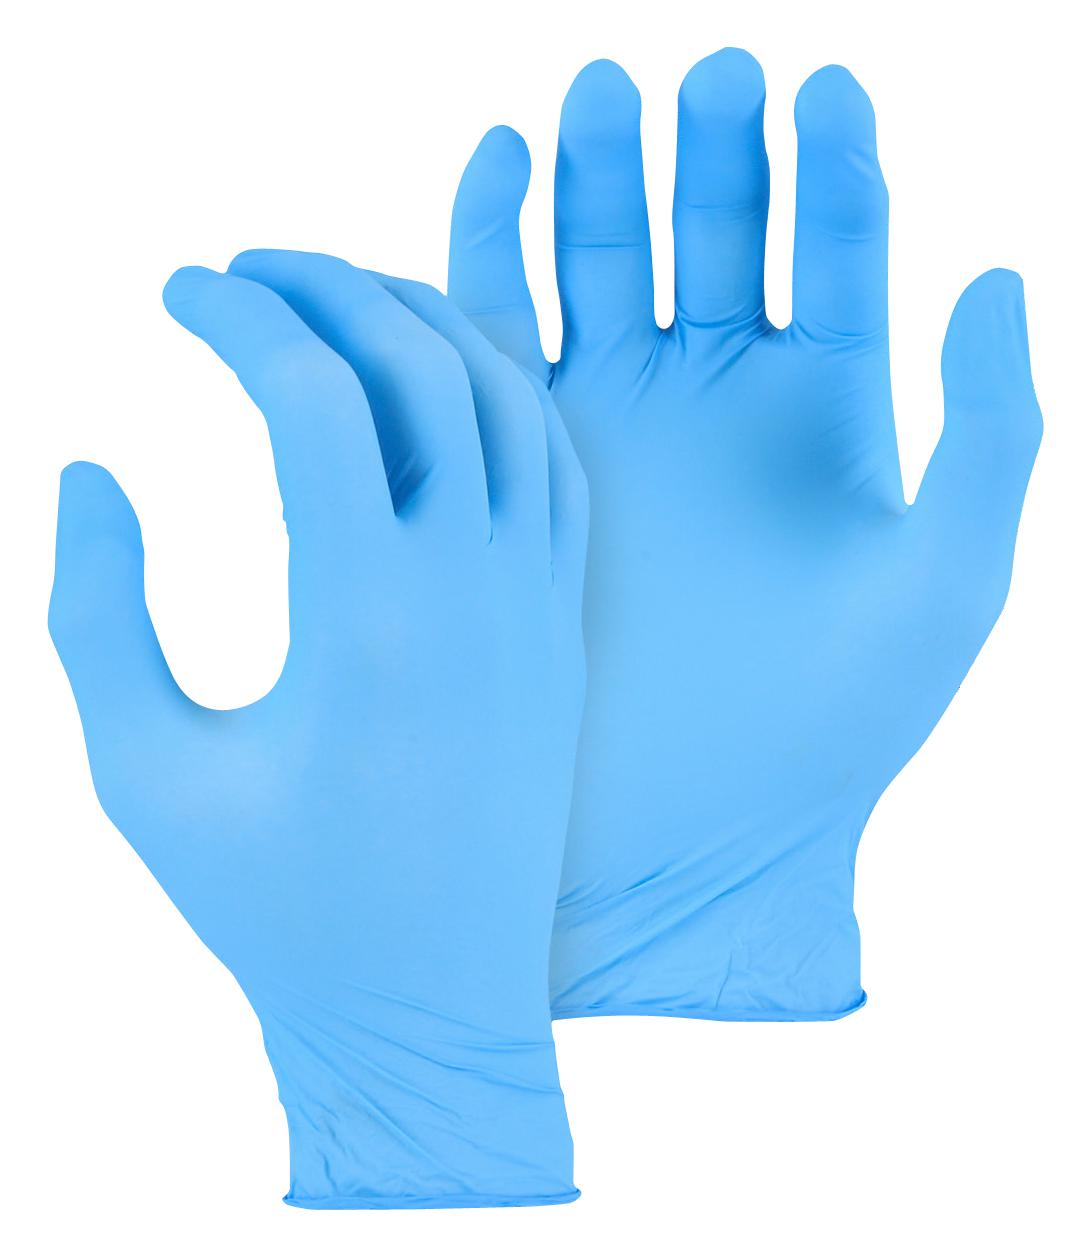 Majestic 3273/11 X-Large NItrile Gloves, Disposable, Blue